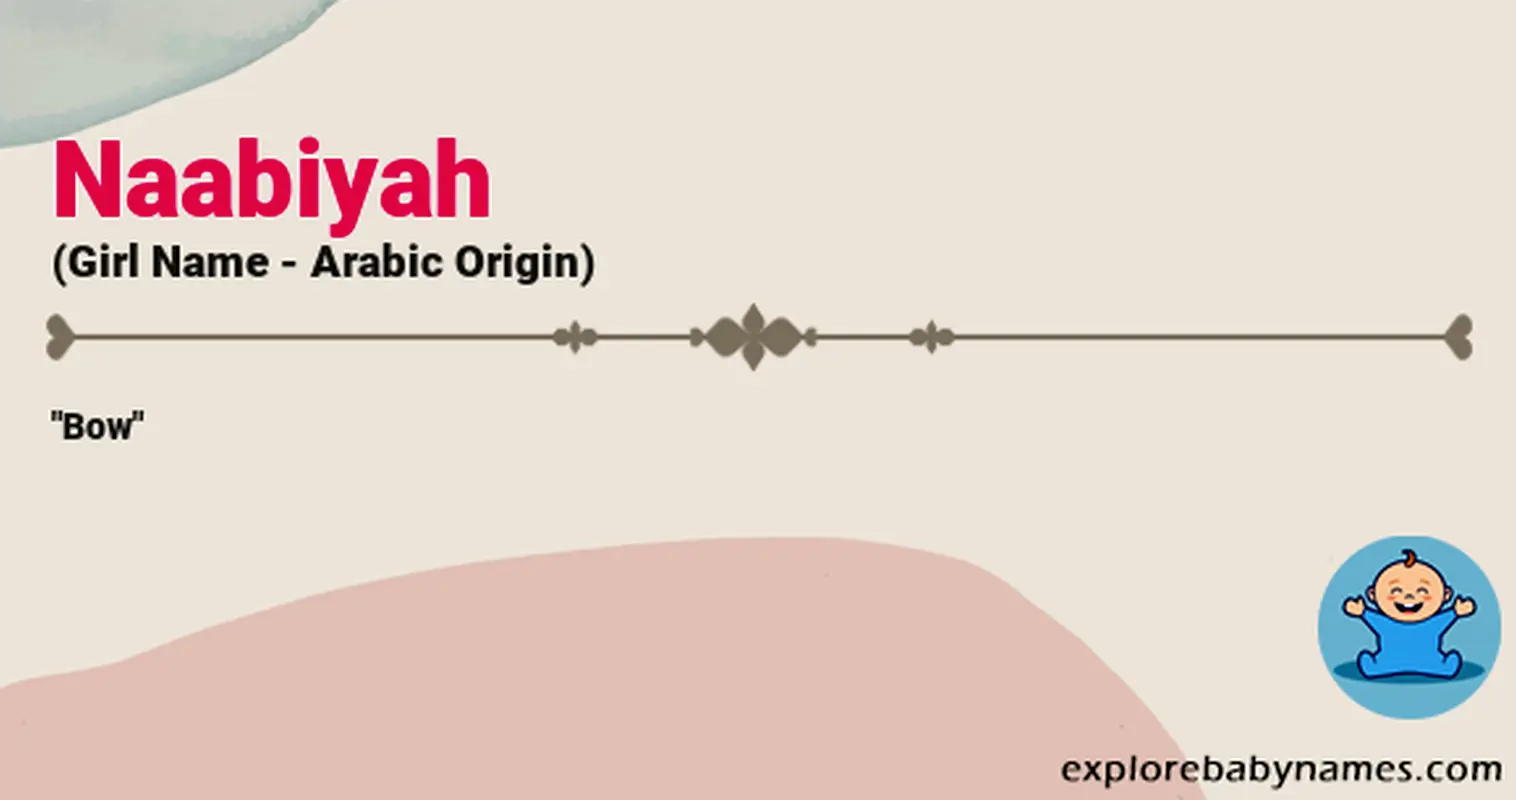 Meaning of Naabiyah